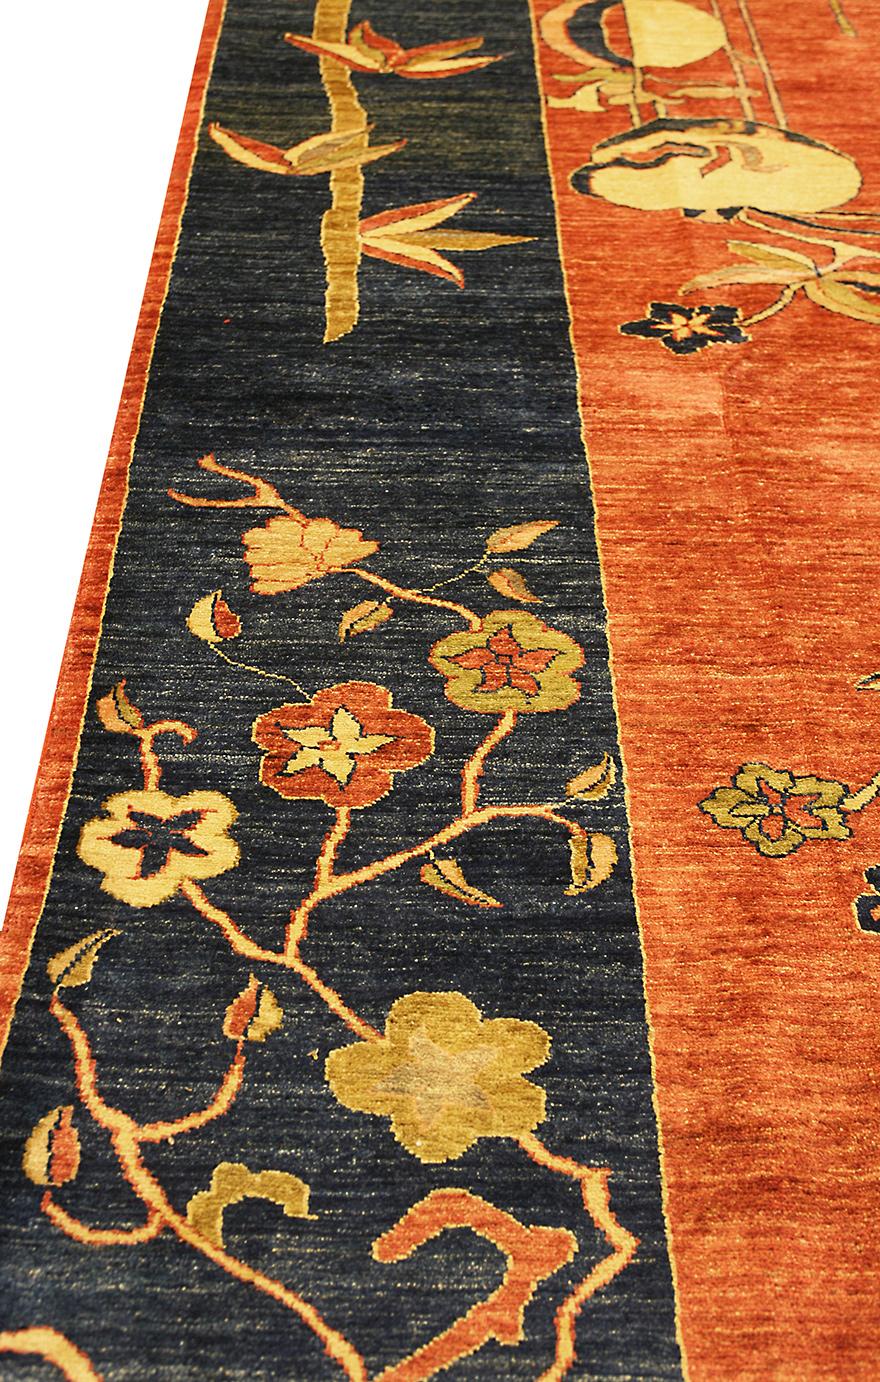 This piece is a must-have for anyone interested in Minimalist Art Deco Design. The beautiful design and soft colors are sure to stand out in any collection. This beautiful rug is known for its symbolic motifs and design. It would make a great